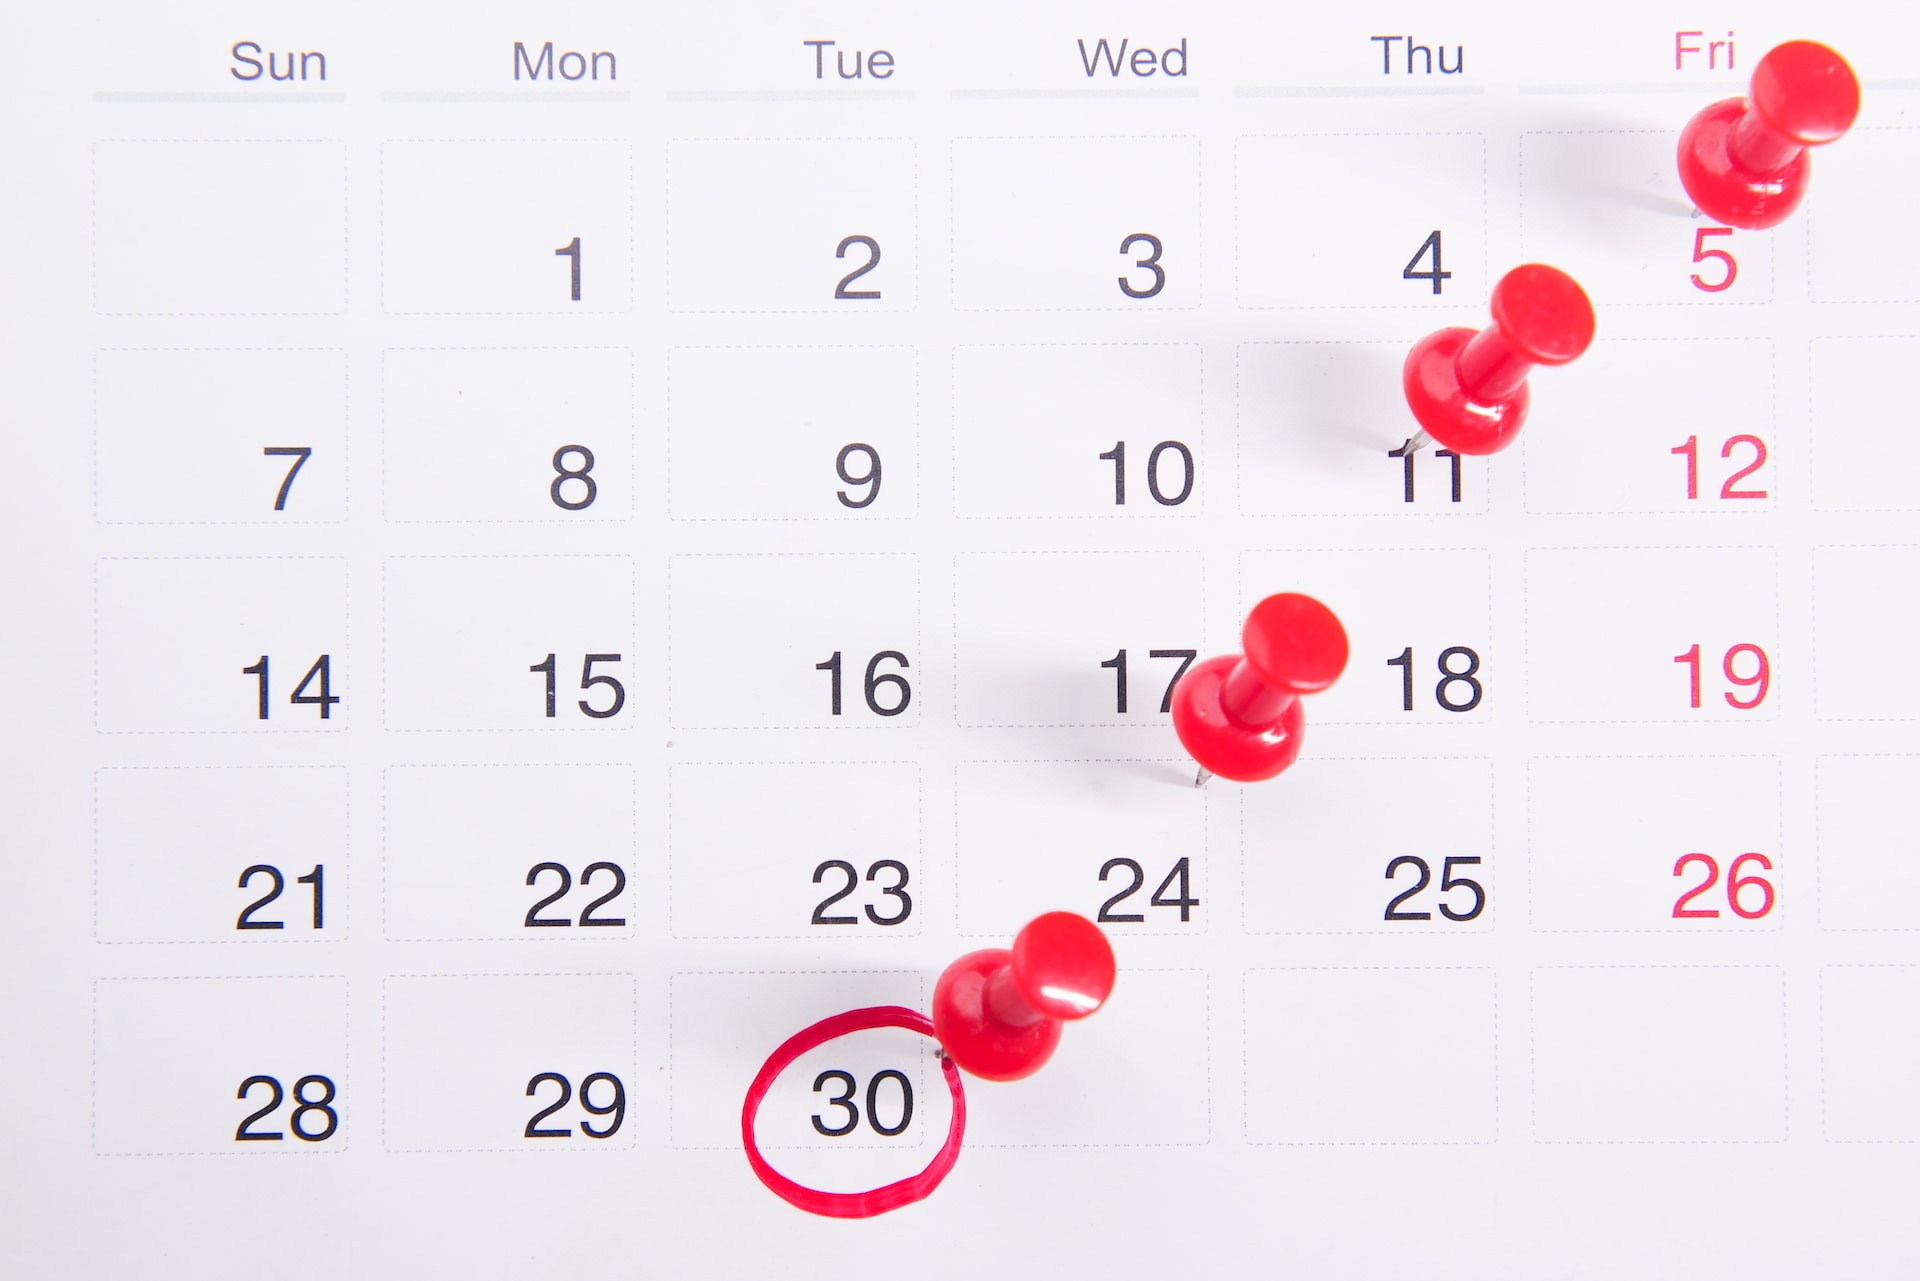 Image shows a calendar with multiple dates pinpointed and one date circled to show the process of choosing a publish date for your book.